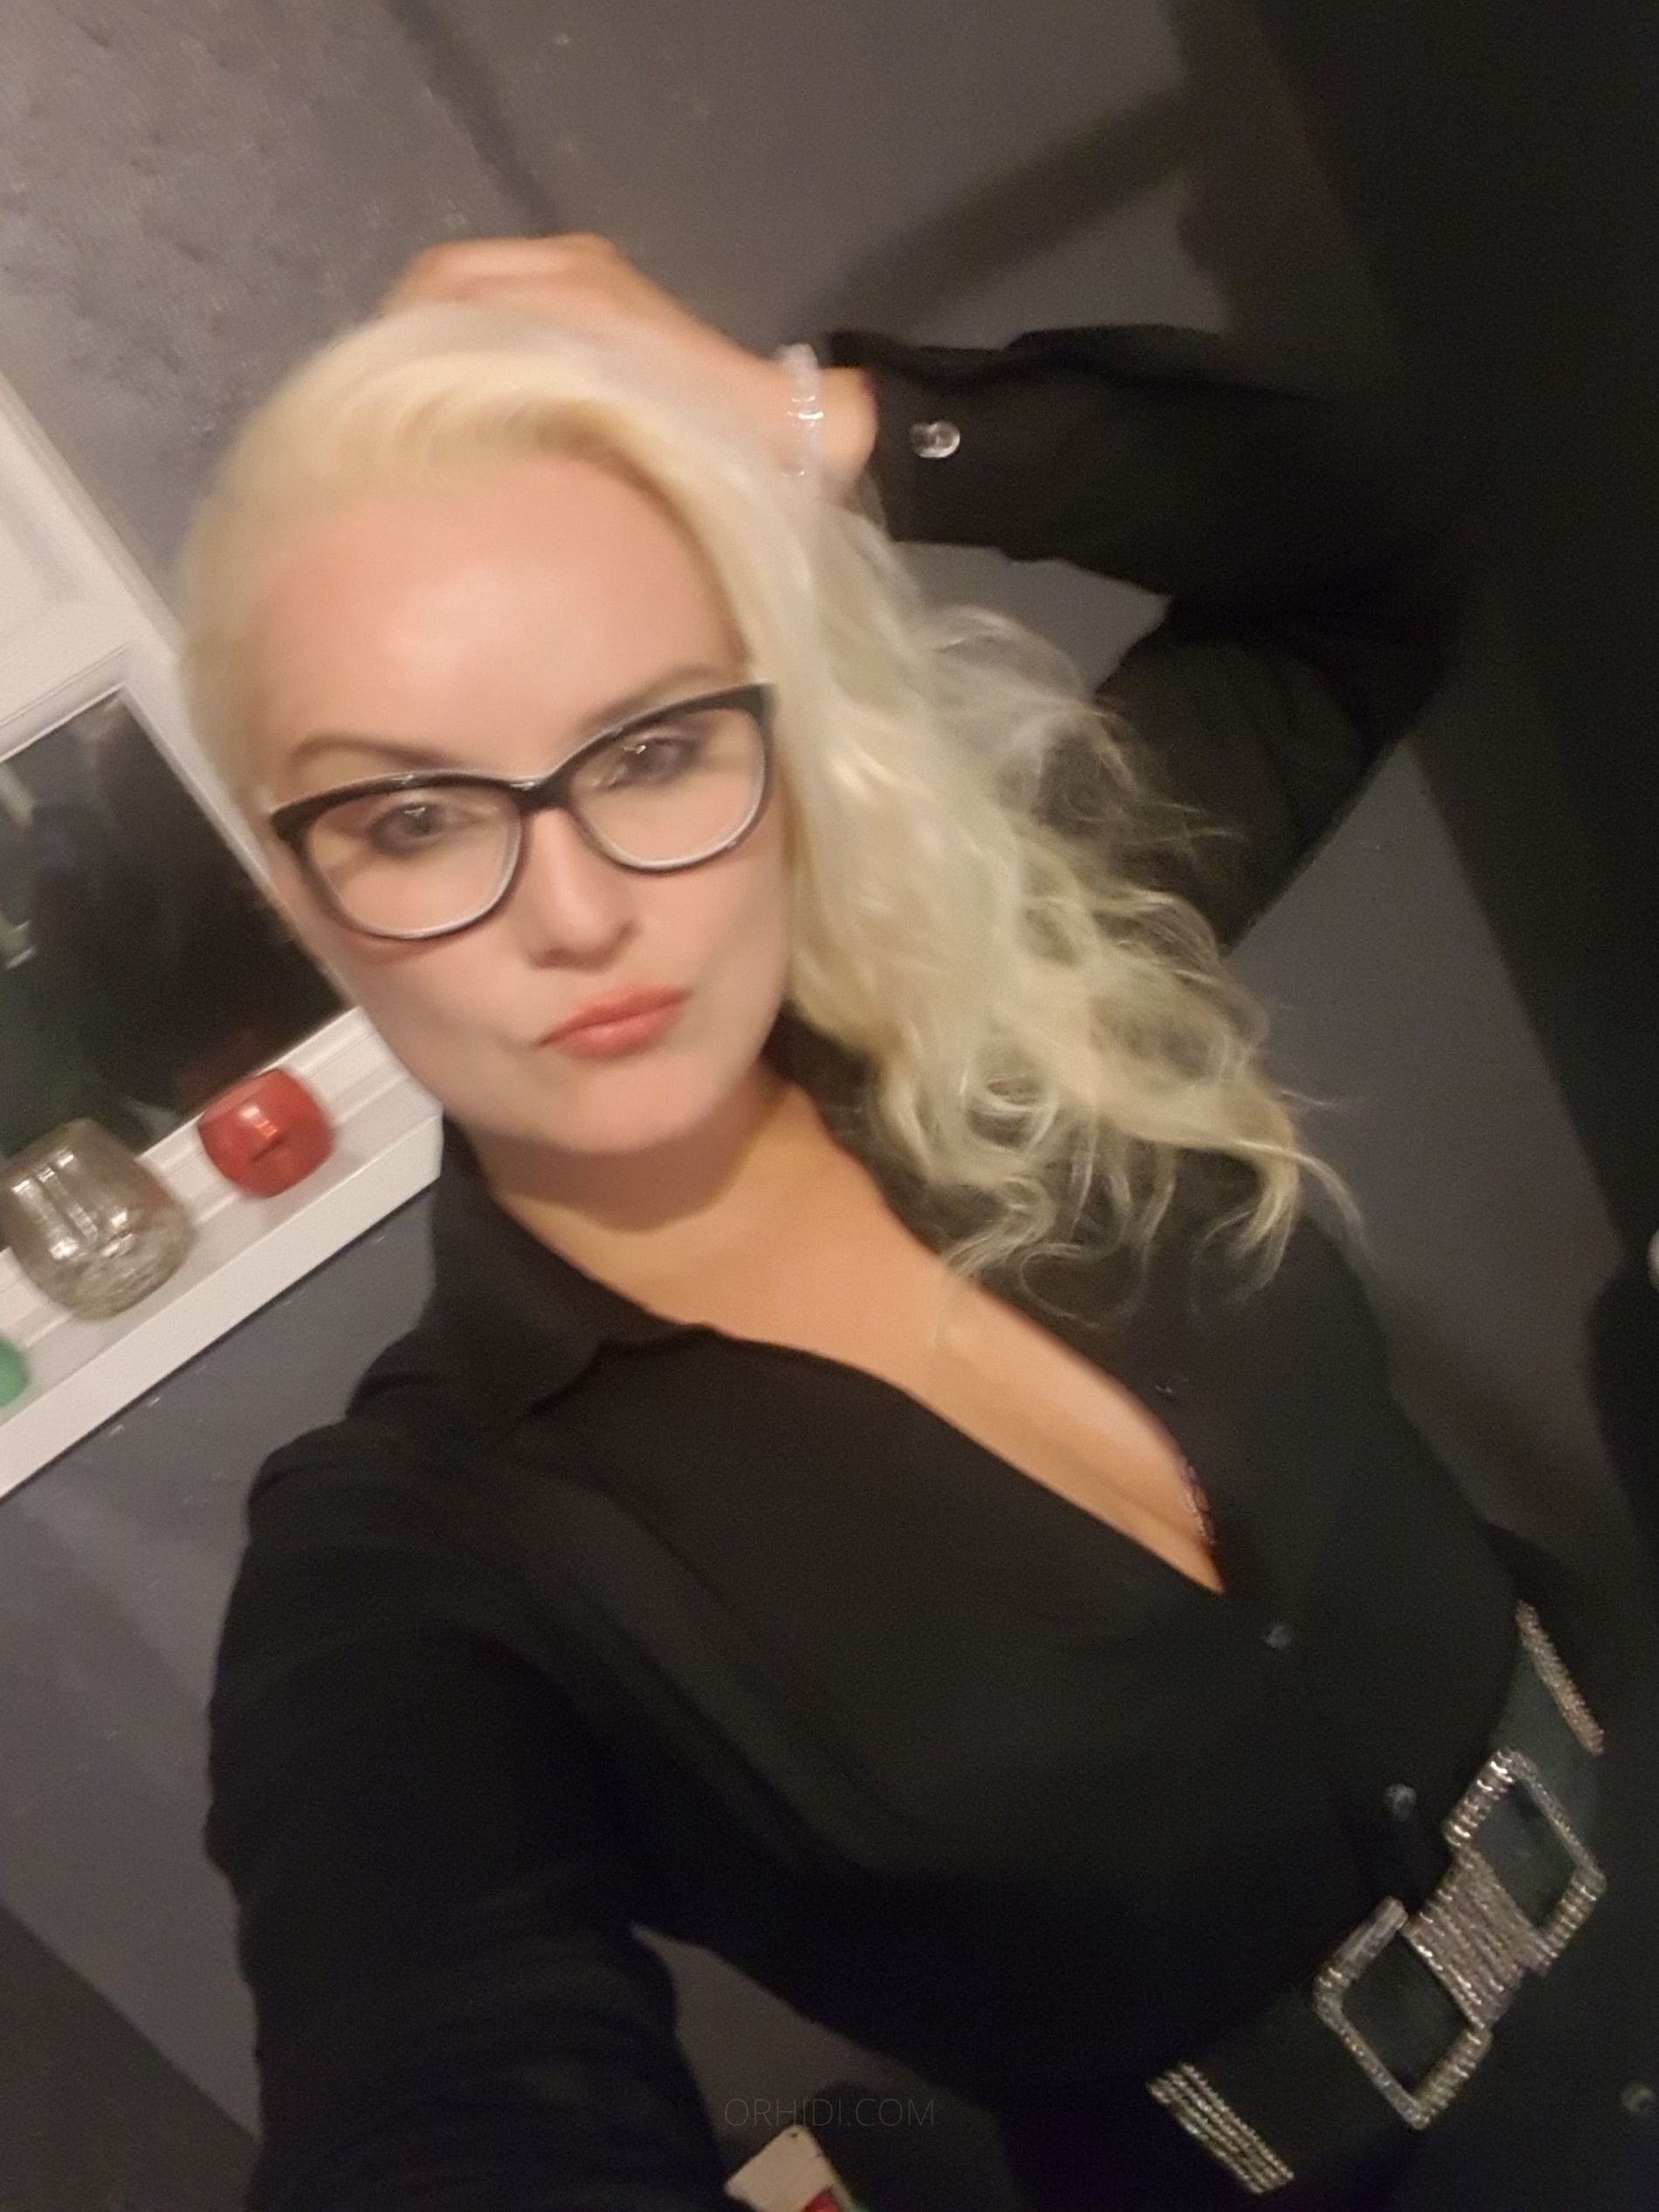 ESCORT IN Southend-on-Sea - model photo VictoriahotSummer